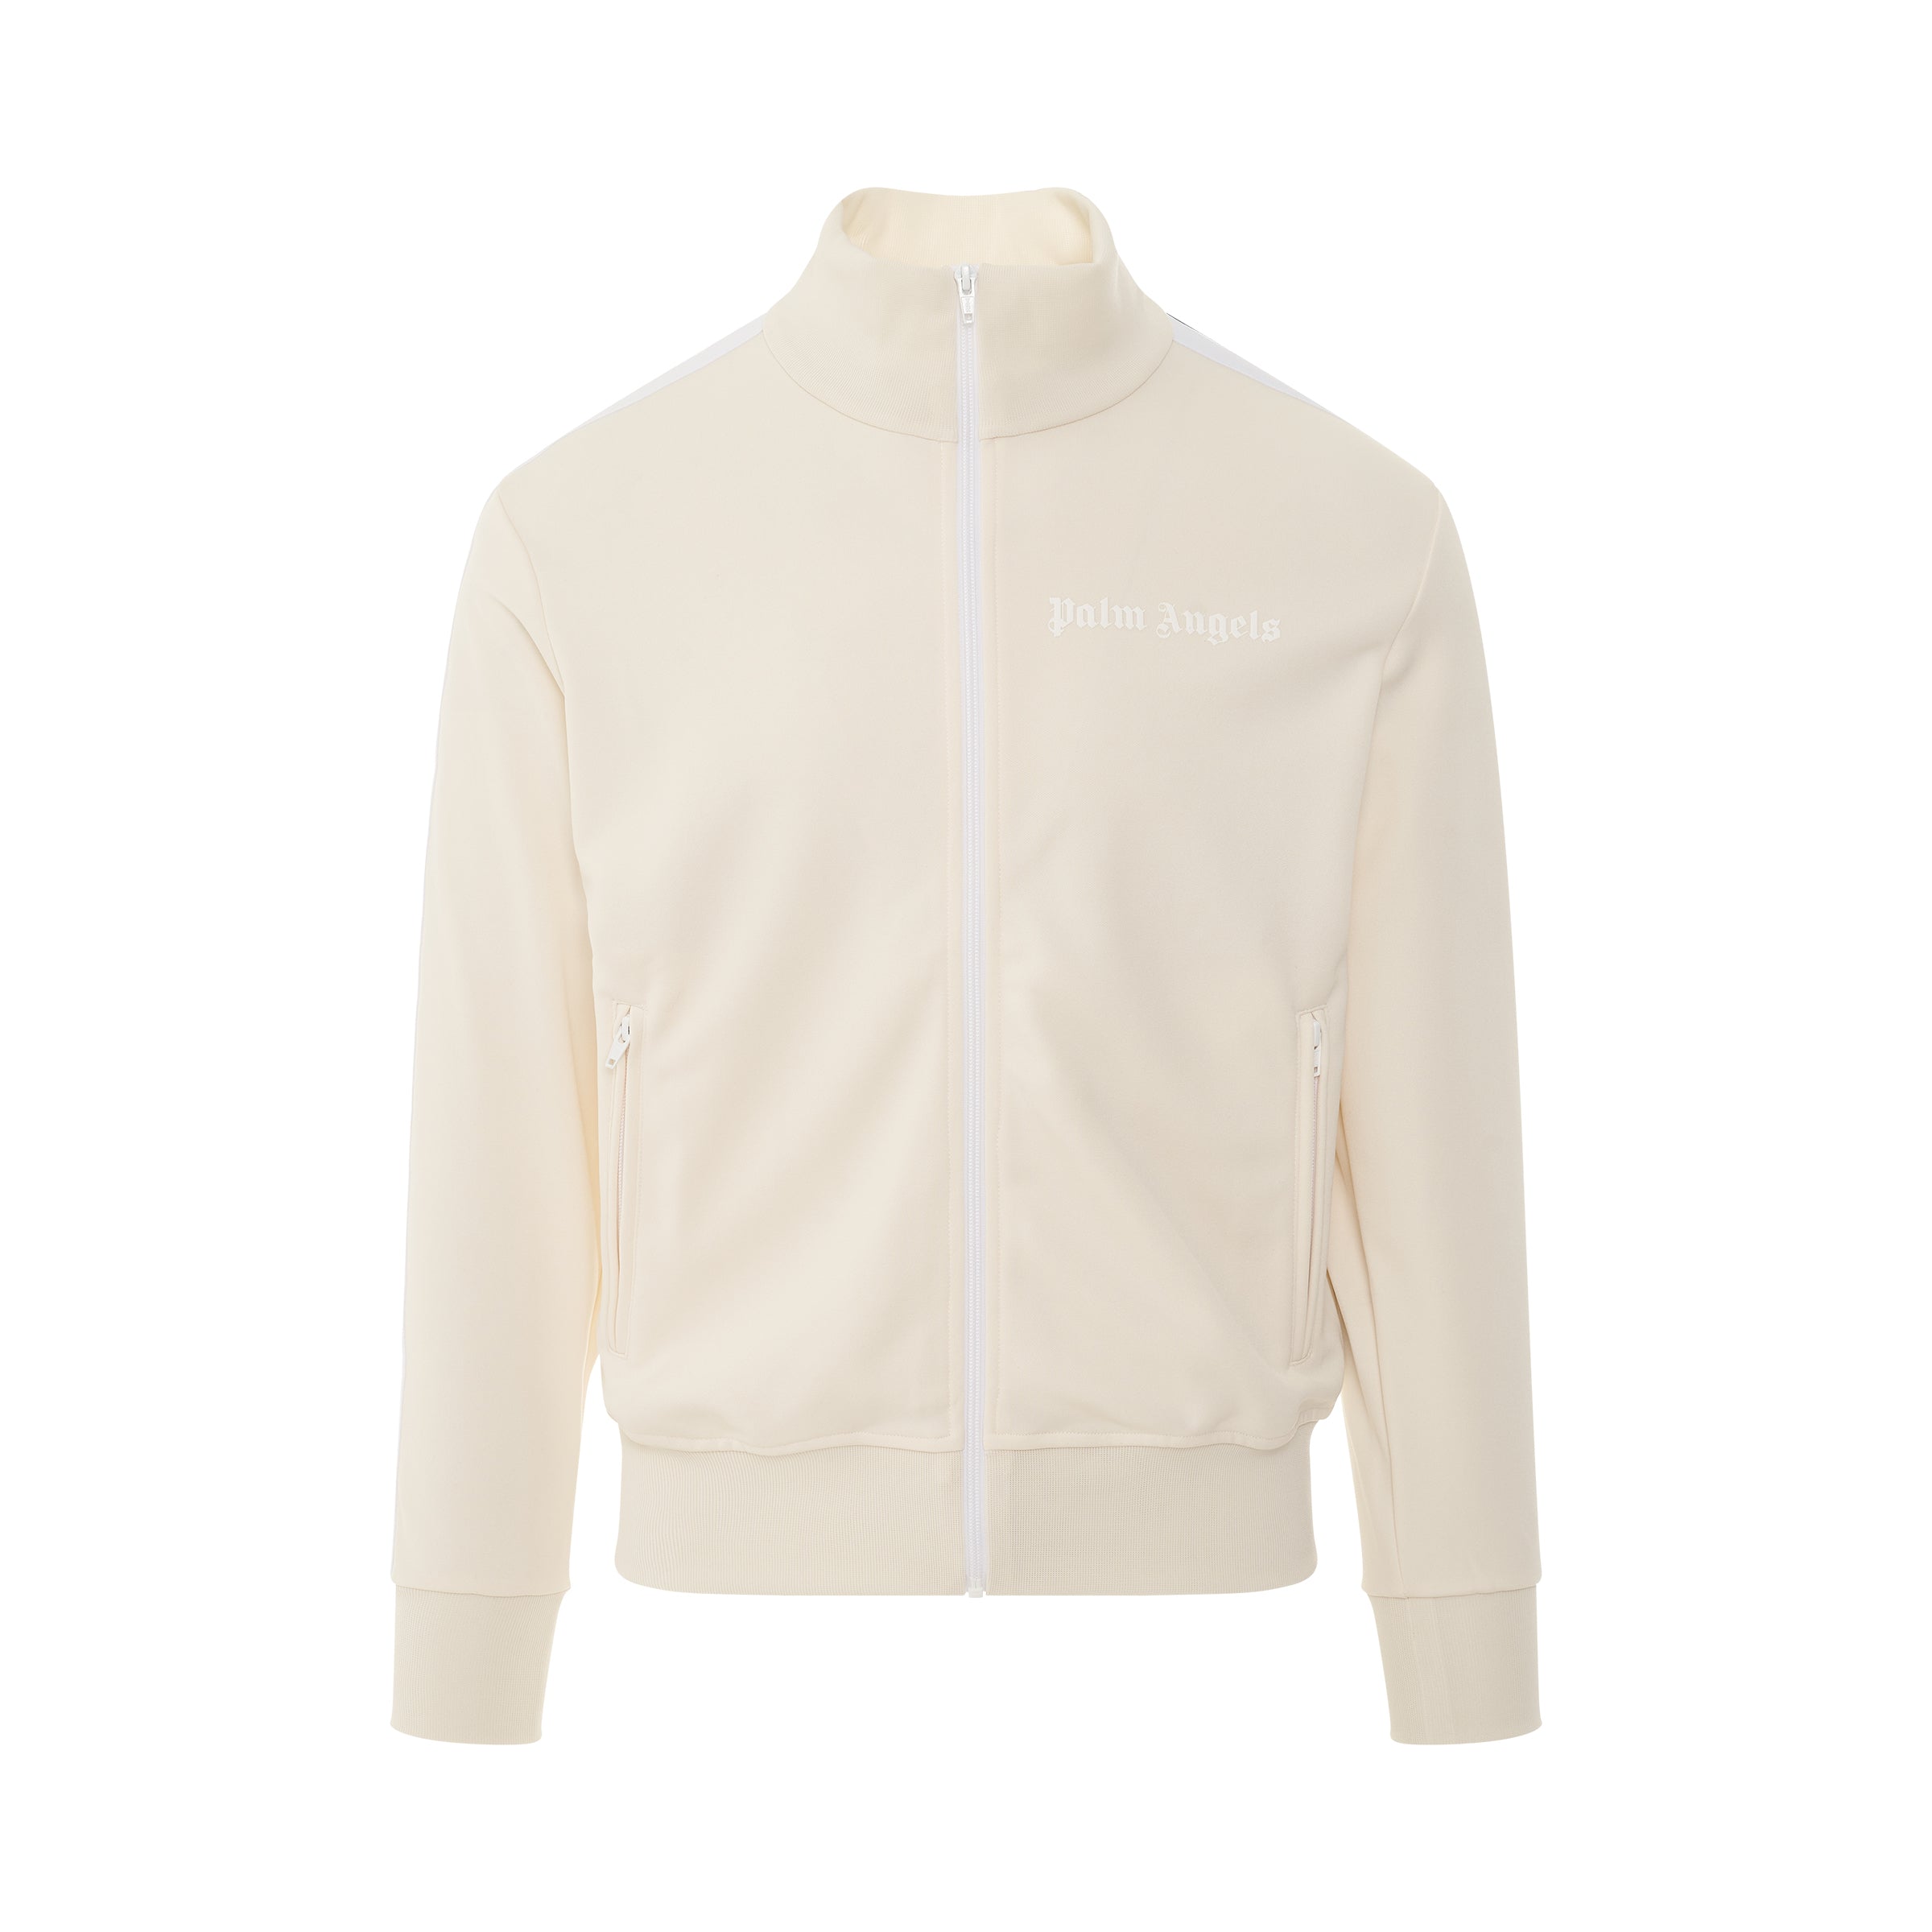 palm angels classic track jacket in off white sold out sold out sale ...